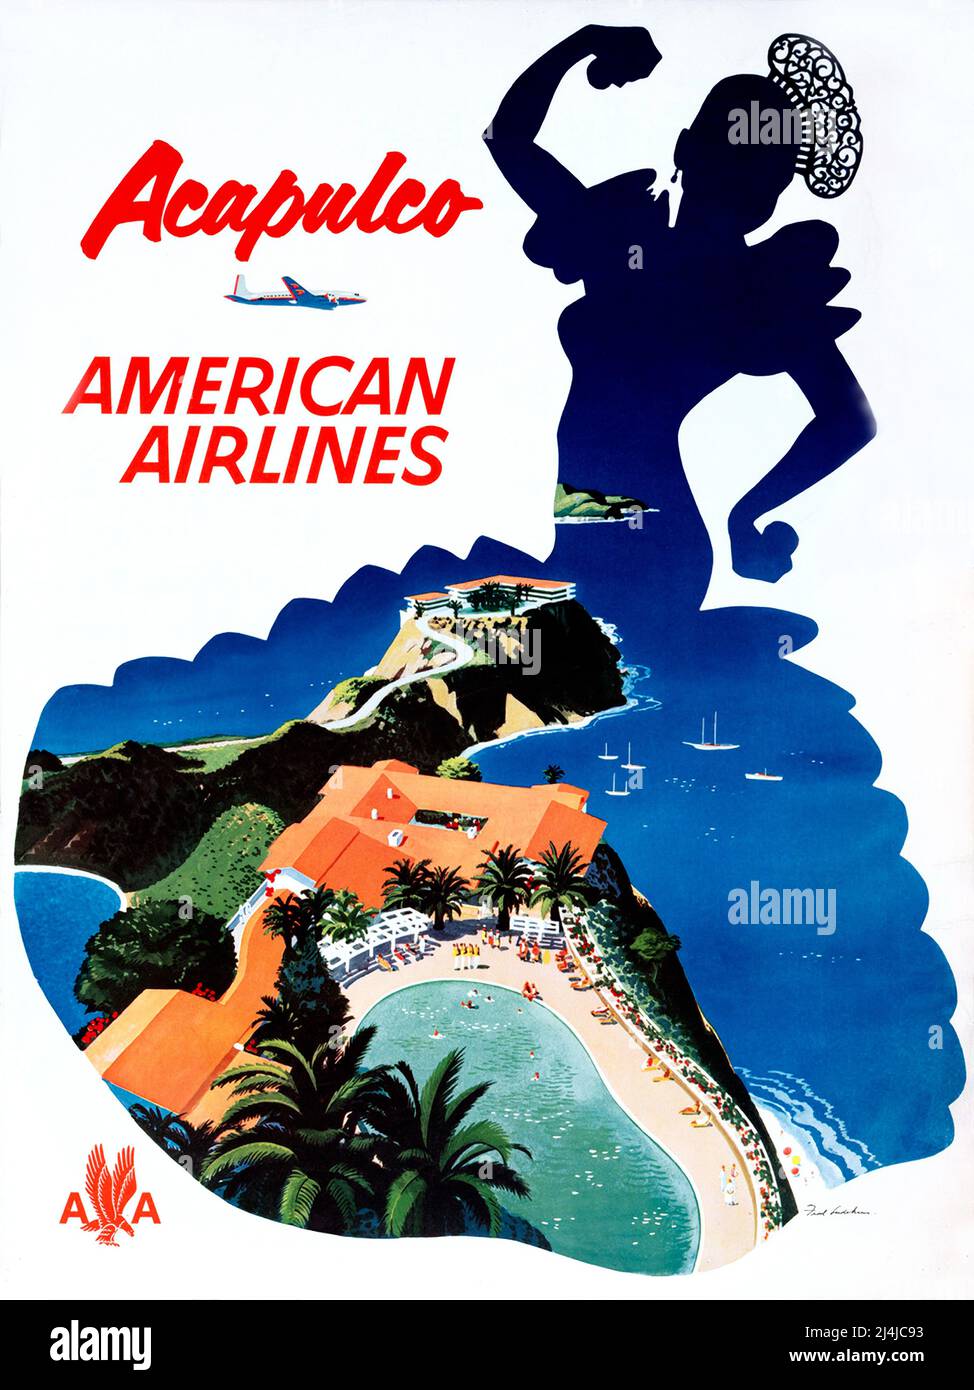 Vintage 1950s Travel Poster - American Airlines - Acapulco - By Fred Ludekens - 1950 Stock Photo